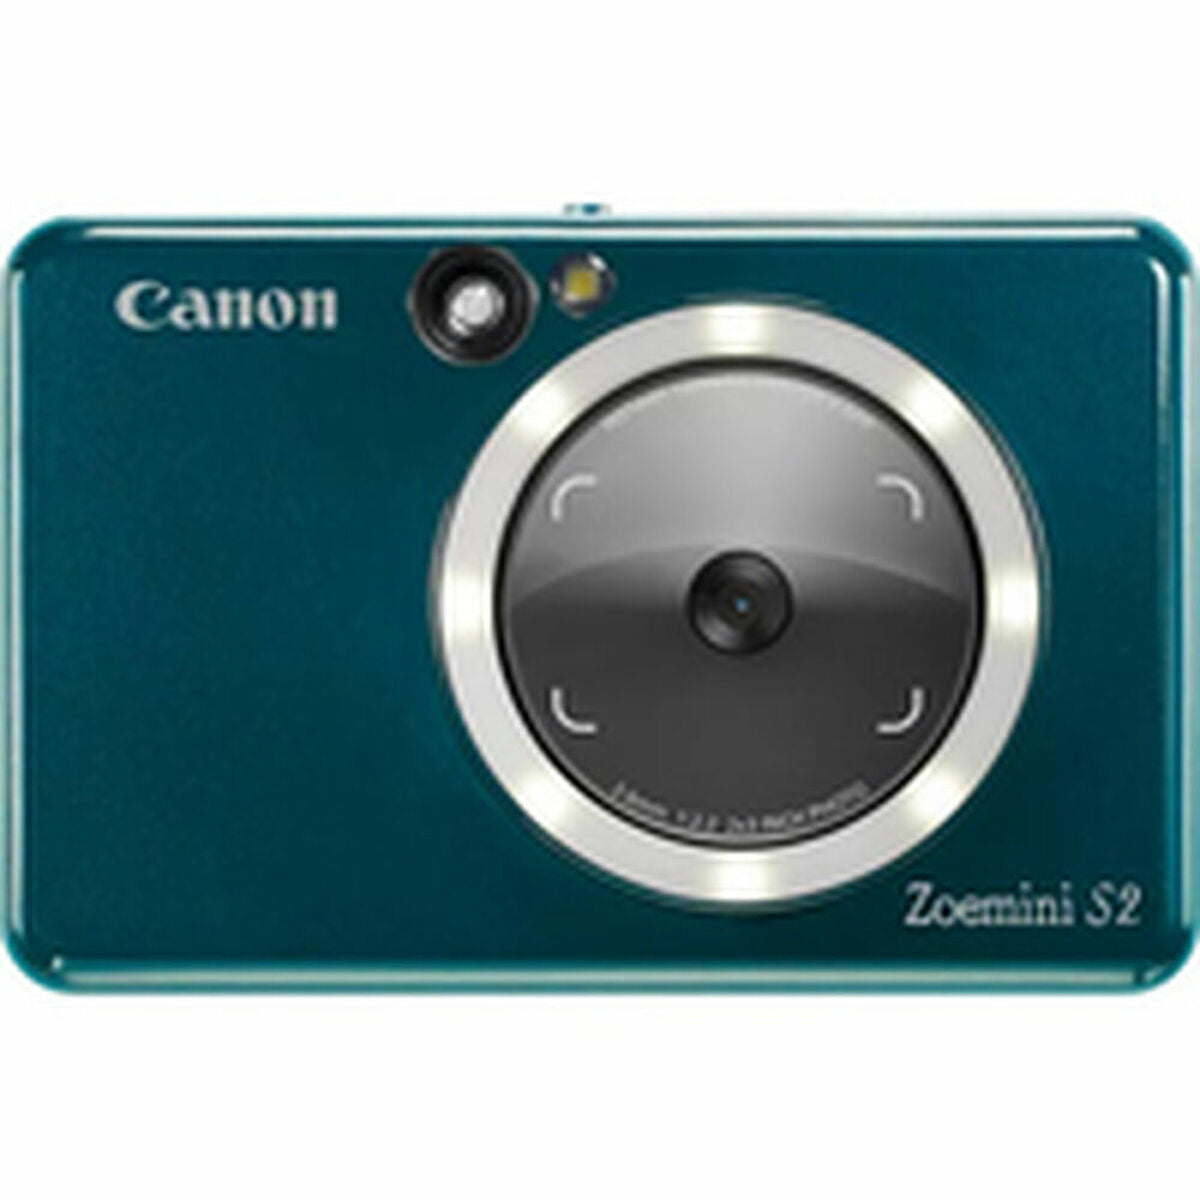 Instant camera Canon Zoemini S2 Blue, Canon, Electronics, Photography and video cameras, instant-camera-canon-zoemini-s2-blue, Brand_Canon, category-reference-2609, category-reference-2614, category-reference-2932, category-reference-t-19653, category-reference-t-8122, category-reference-t-8302, Condition_NEW, deportista / en forma, entertainment, fotografía, Price_100 - 200, travel, RiotNook